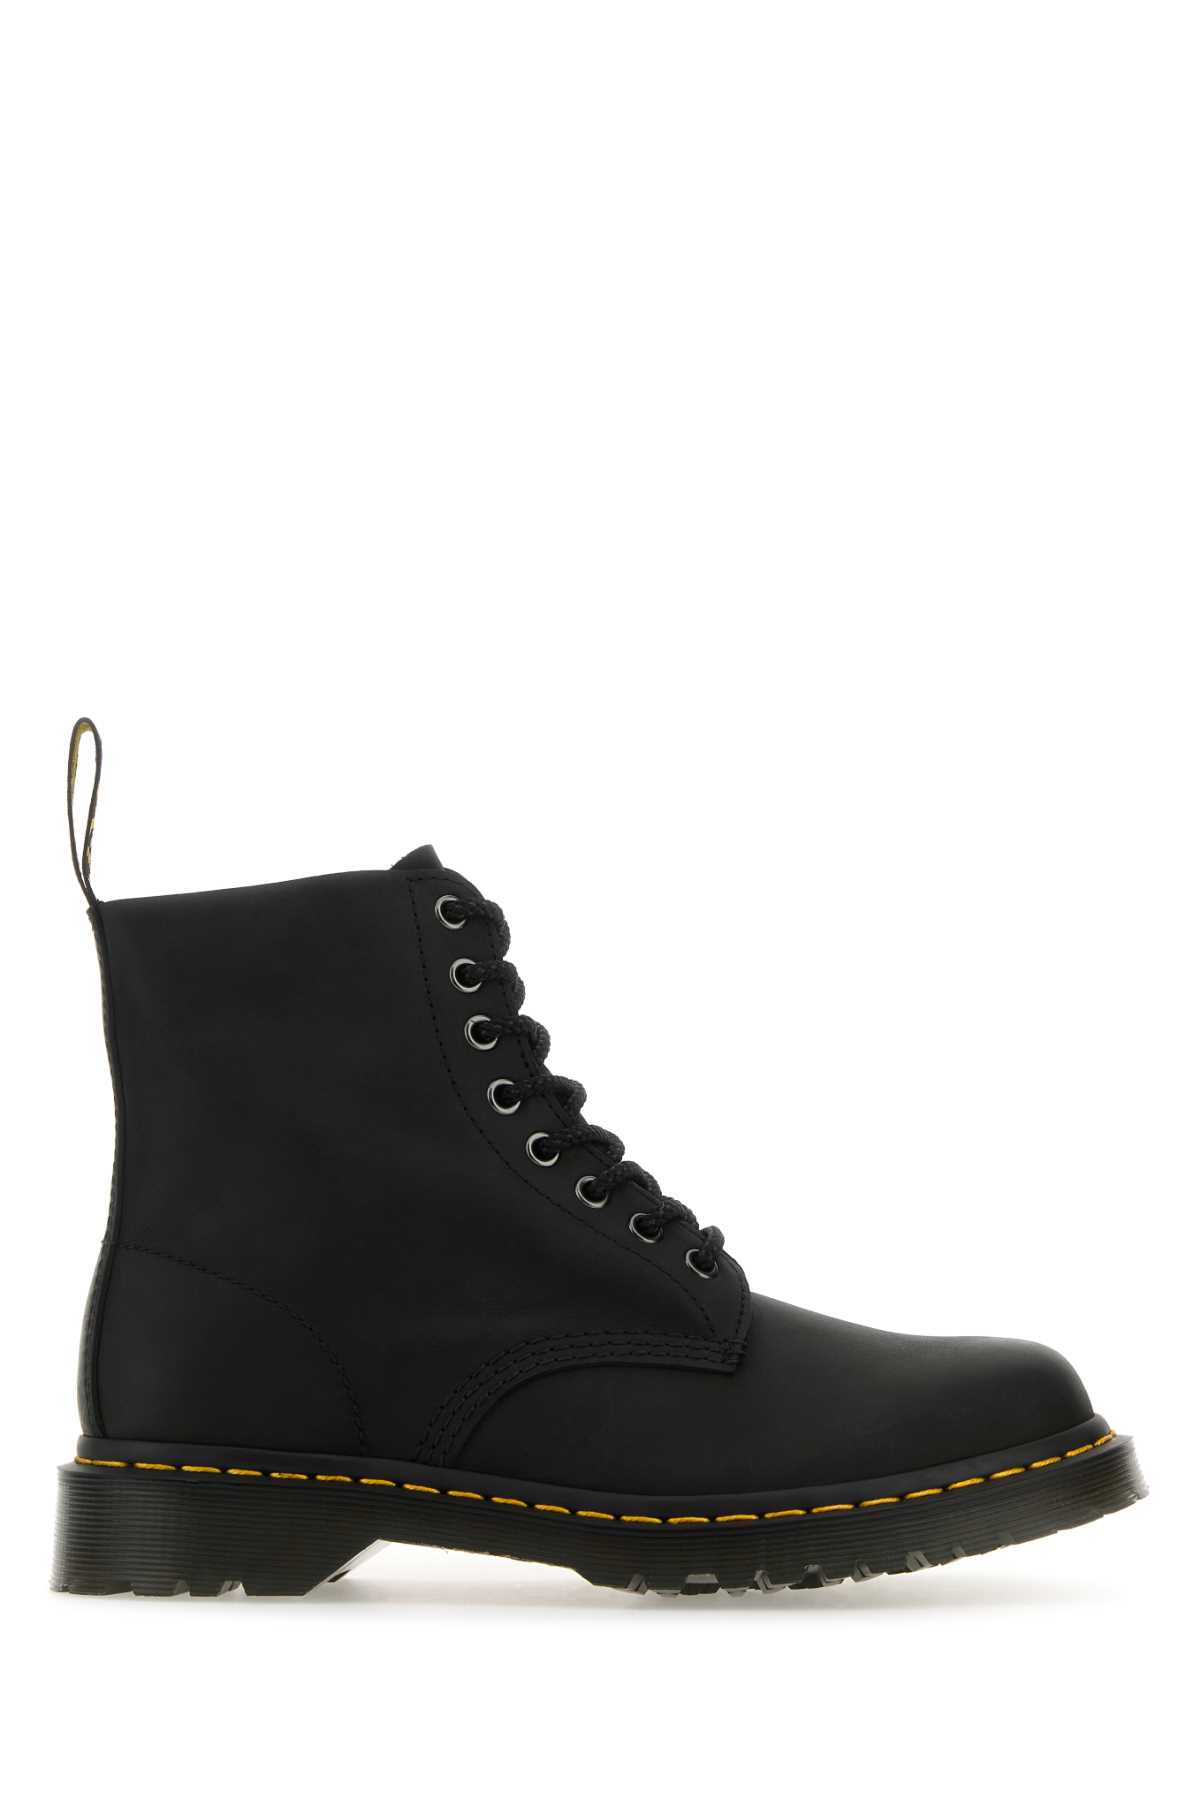 Black Leather 1460 Ankle Boots